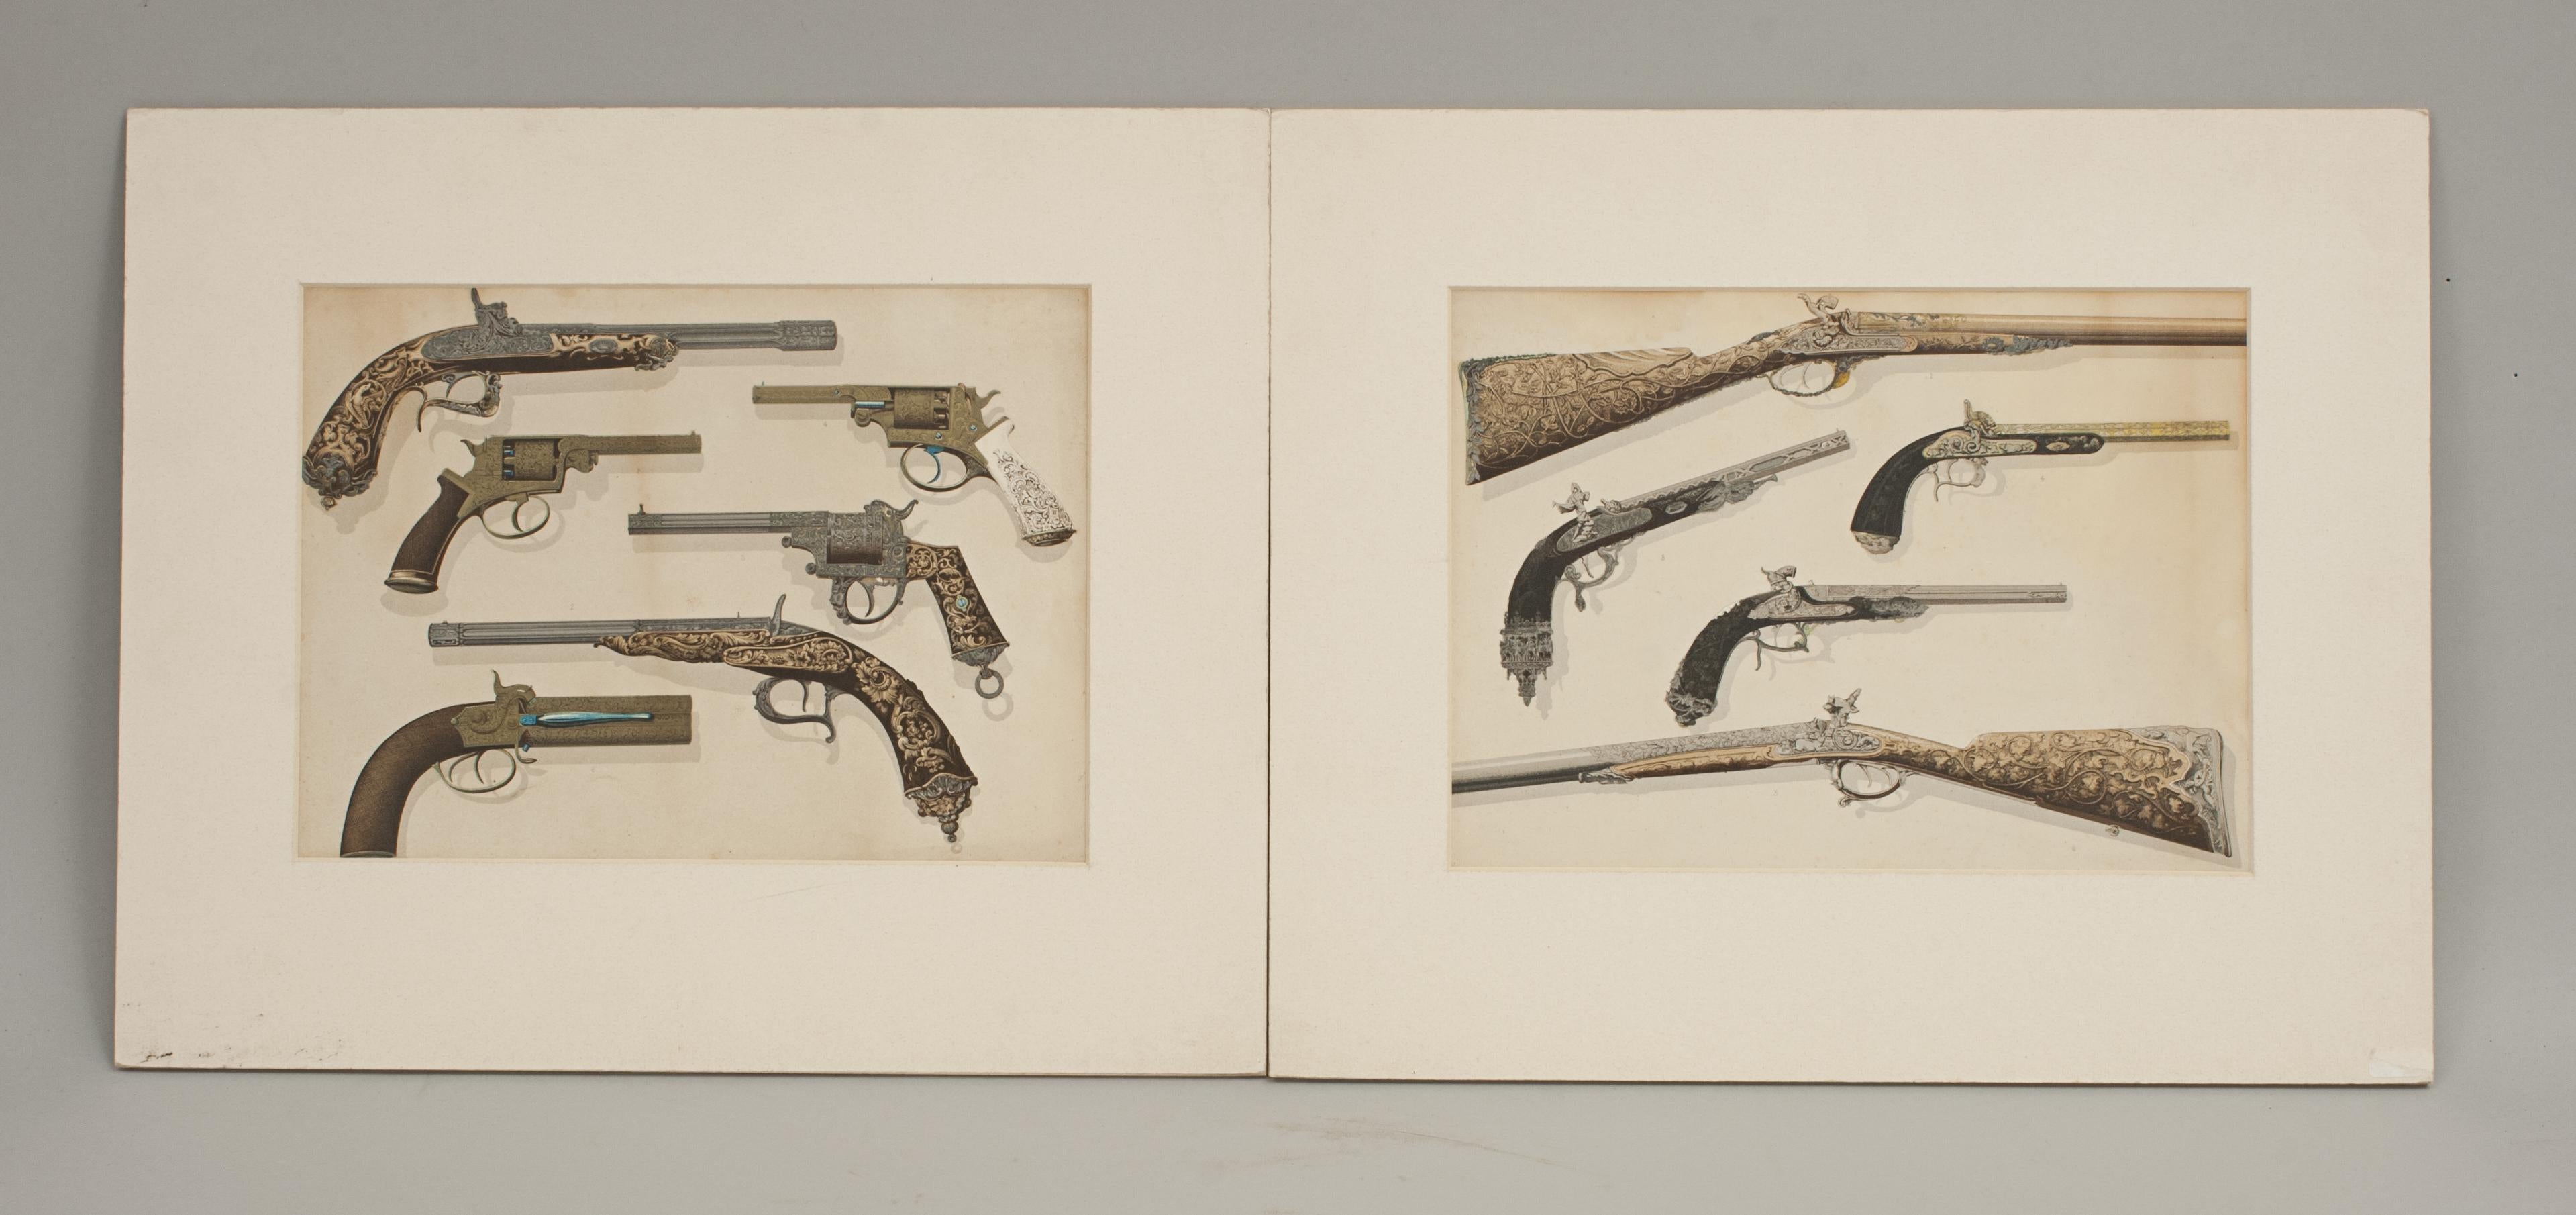 A pair of mounted lithographic prints of very decorative hammer guns pistols and rifles and drum revolvers.
This is a very unusual pair of prints
Late 19th century.